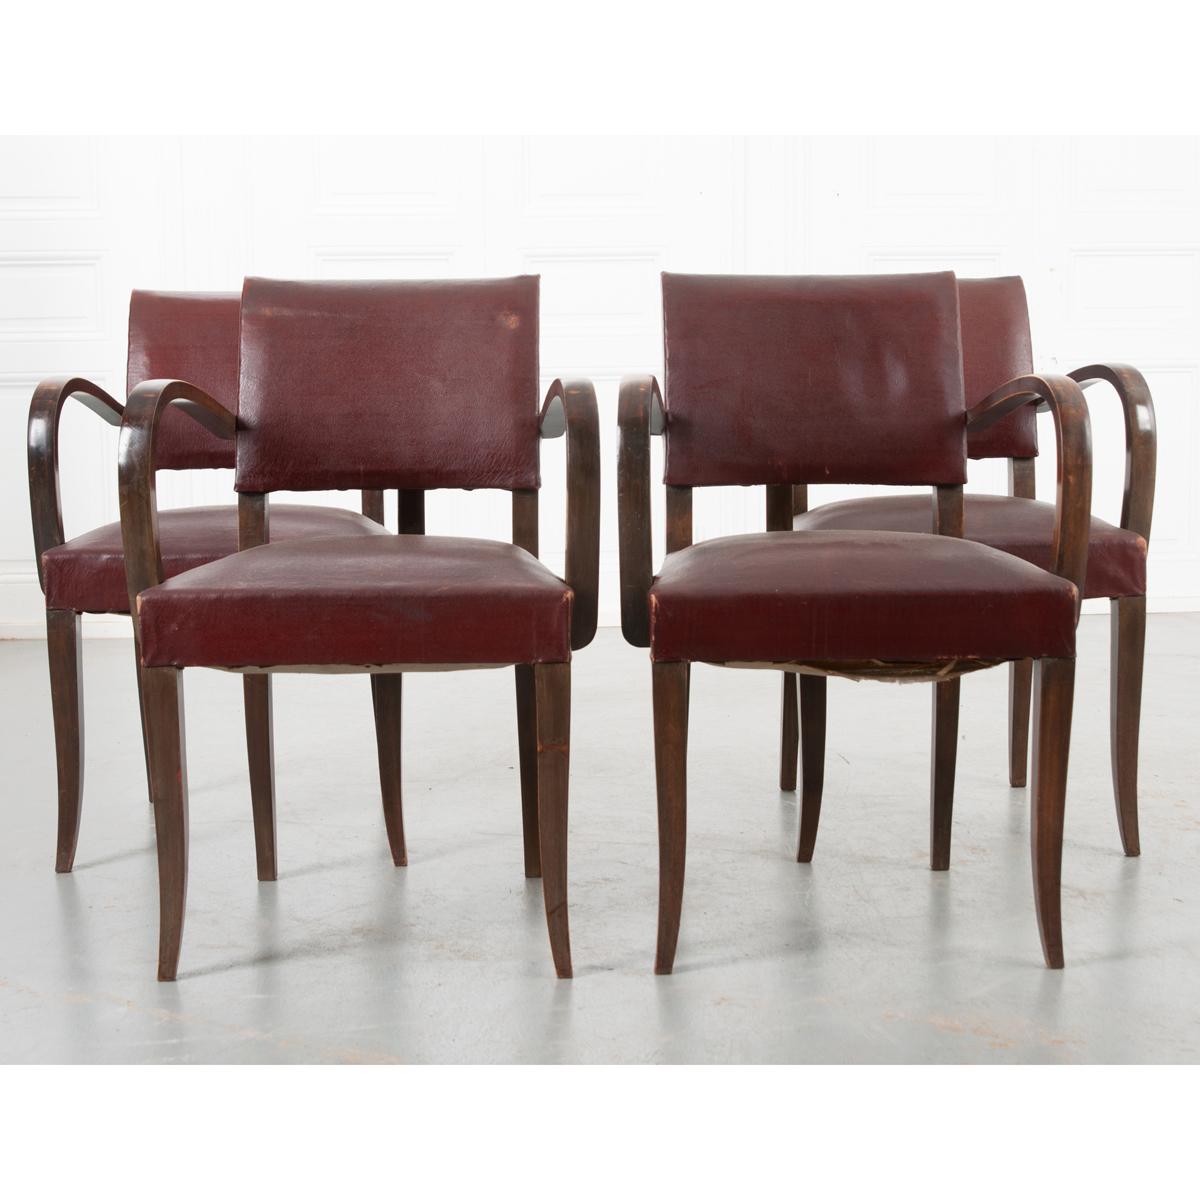 This set of comfortable upholstered arm chairs have an oak frame and great patina throughout. The dark red upholstery is slightly worn but in good condition. Round, decorative nailheads secure the fabric to the seat back and add a charming amount of